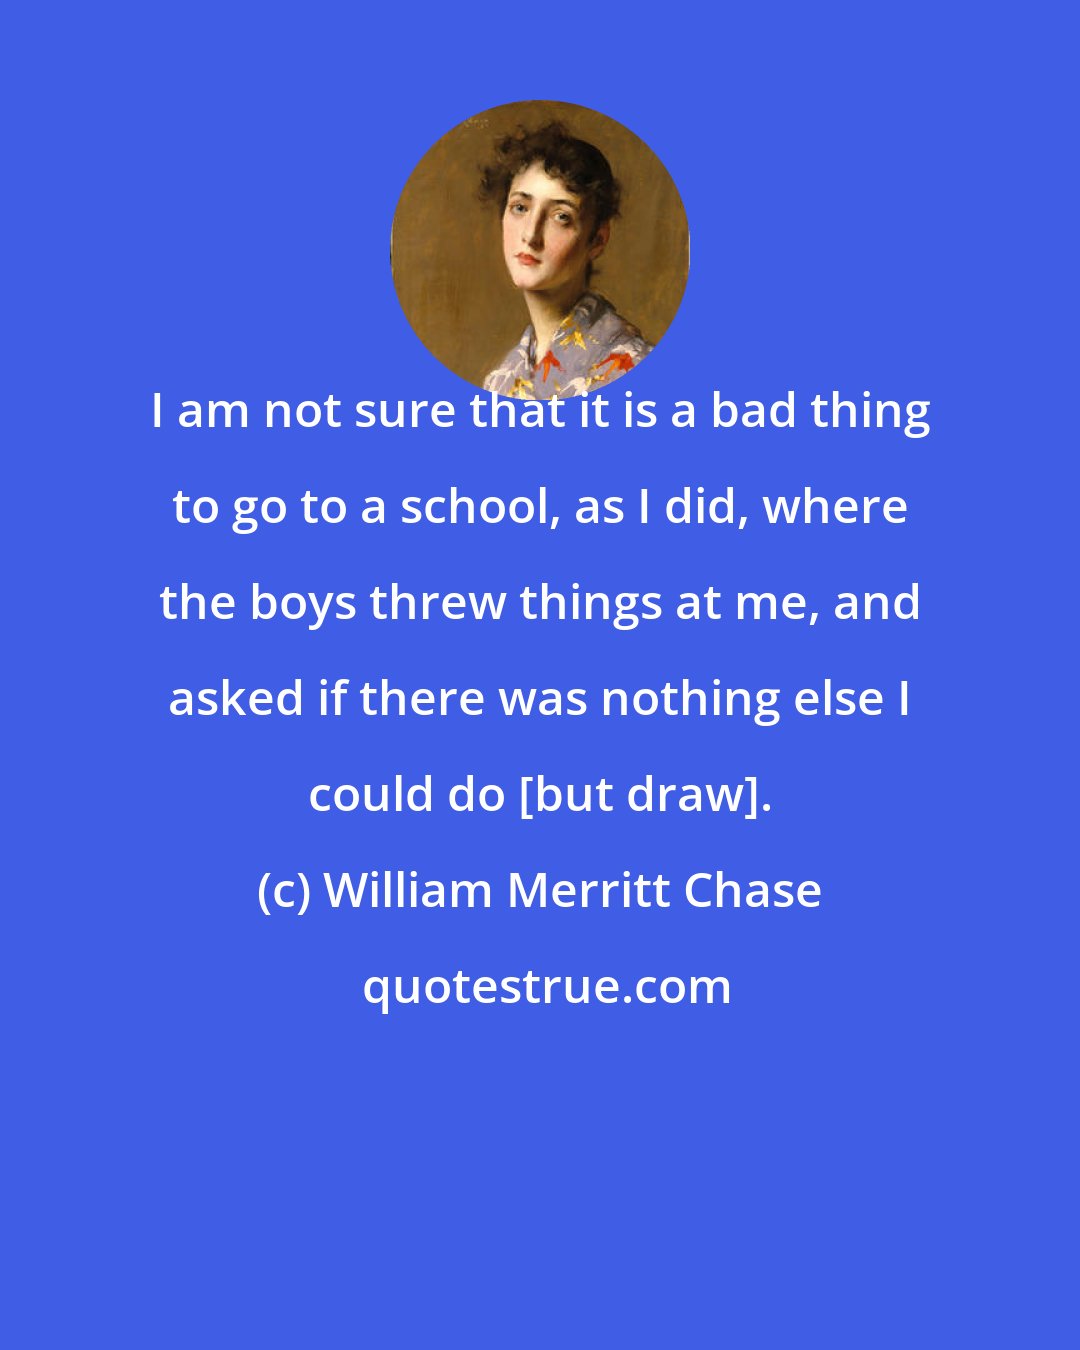 William Merritt Chase: I am not sure that it is a bad thing to go to a school, as I did, where the boys threw things at me, and asked if there was nothing else I could do [but draw].